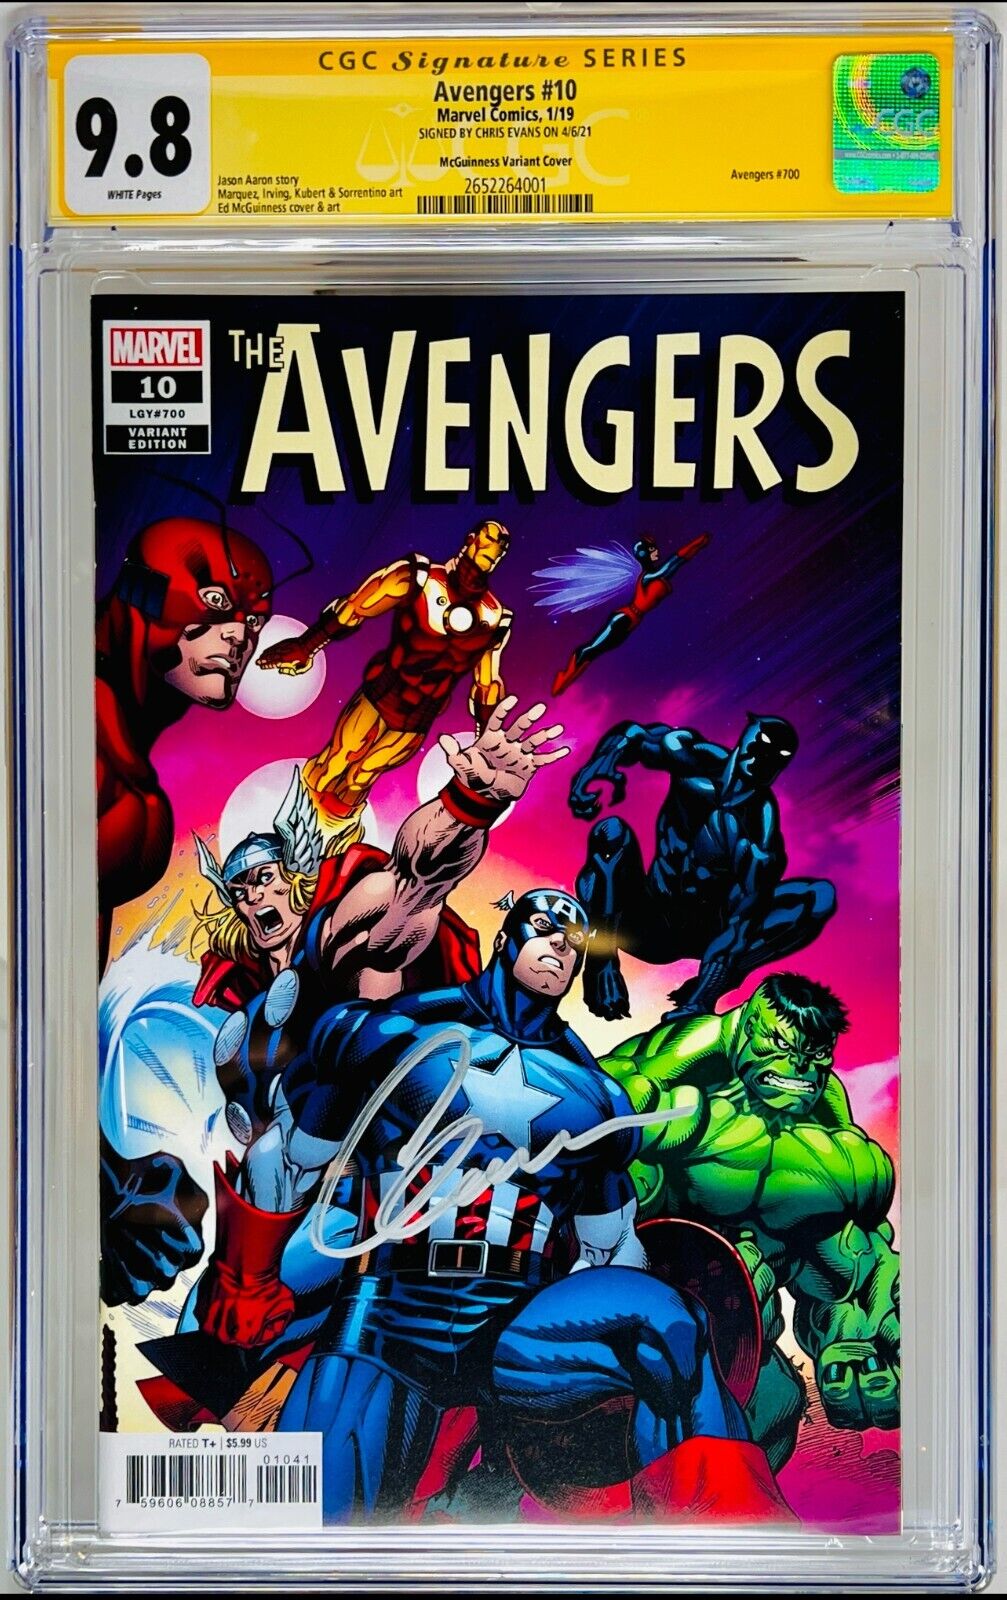 CGC SS Graded 9.8 The Avengers #10 McGuinness Variant Signed by Chris Evans